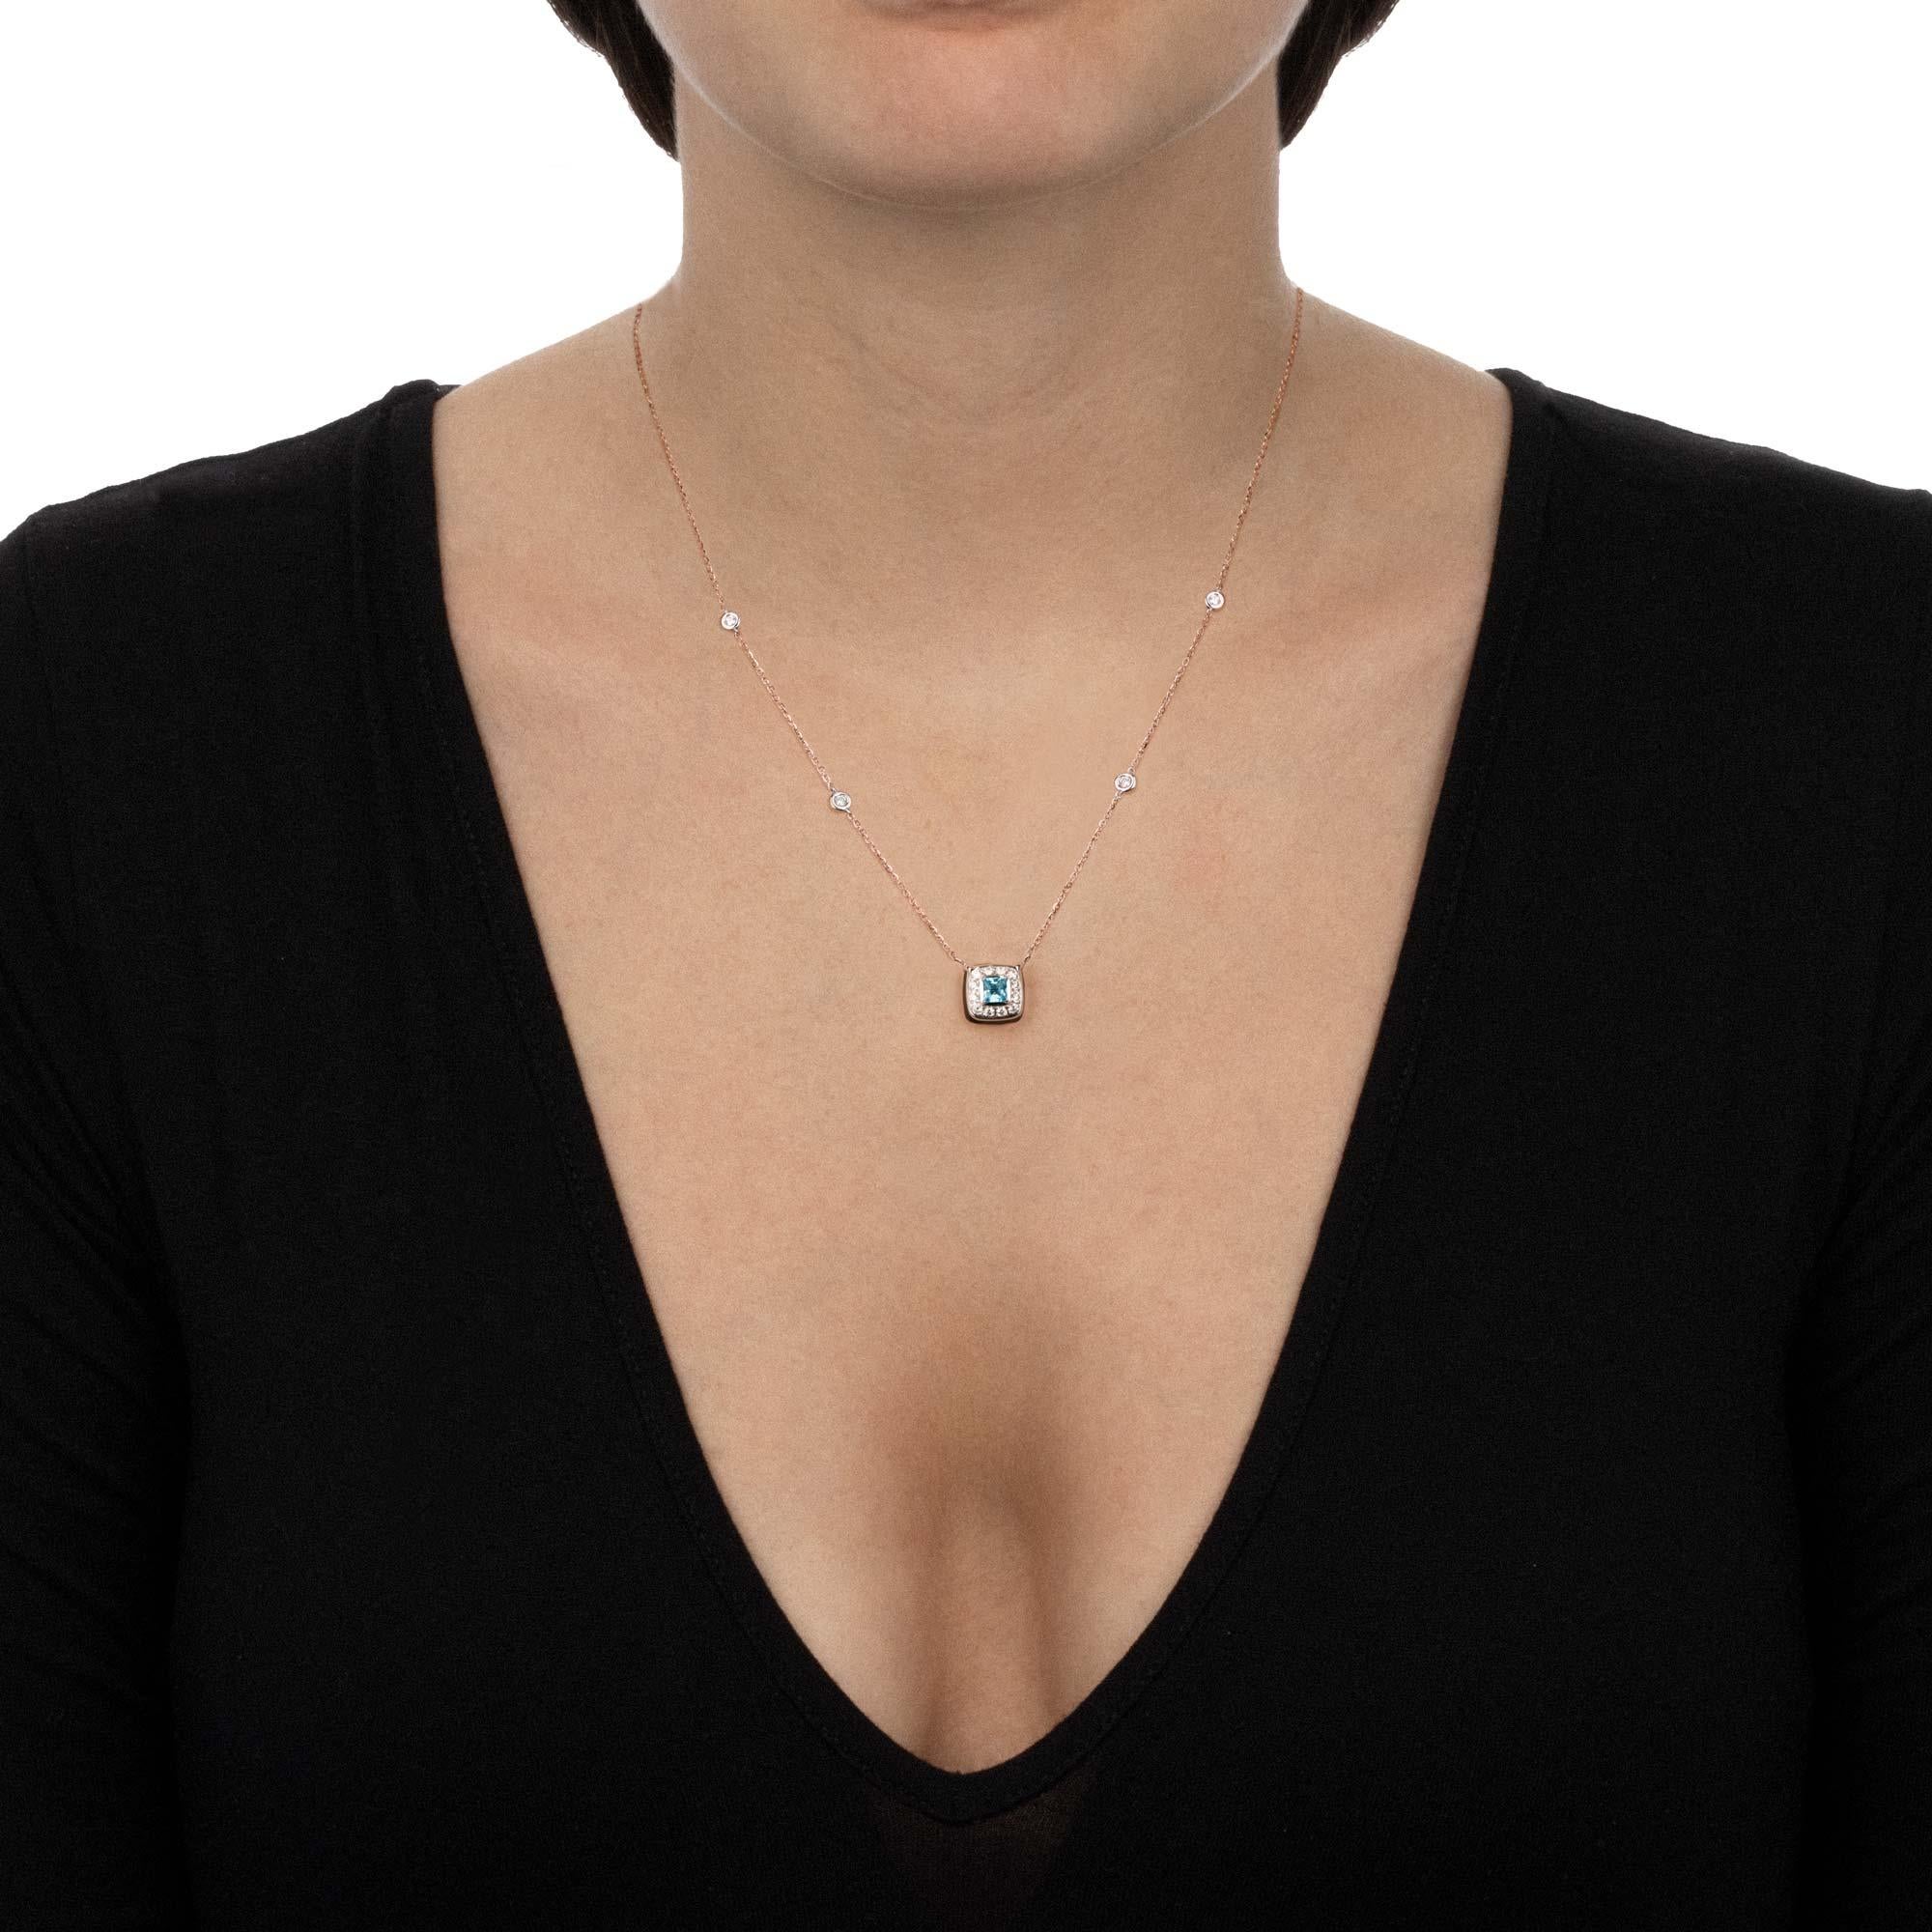 The light blue topaz with the amber brown smoky quartz complete the refined balance of style between bright diamonds and a rose gold chain. A sophisticated and lively necklace for an elegant and modern look.

Necklace lenght 43 cm with extension at